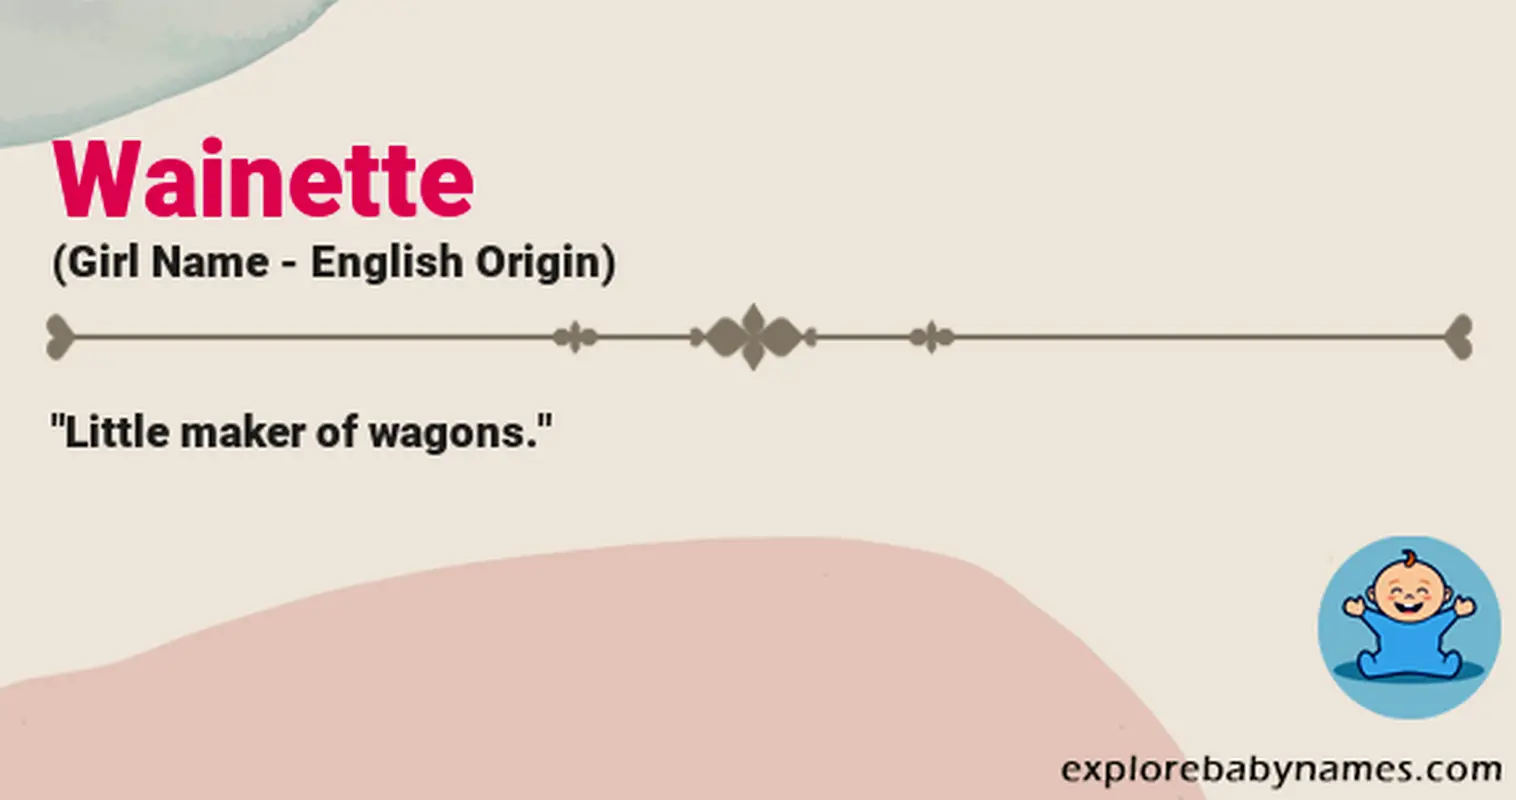 Meaning of Wainette